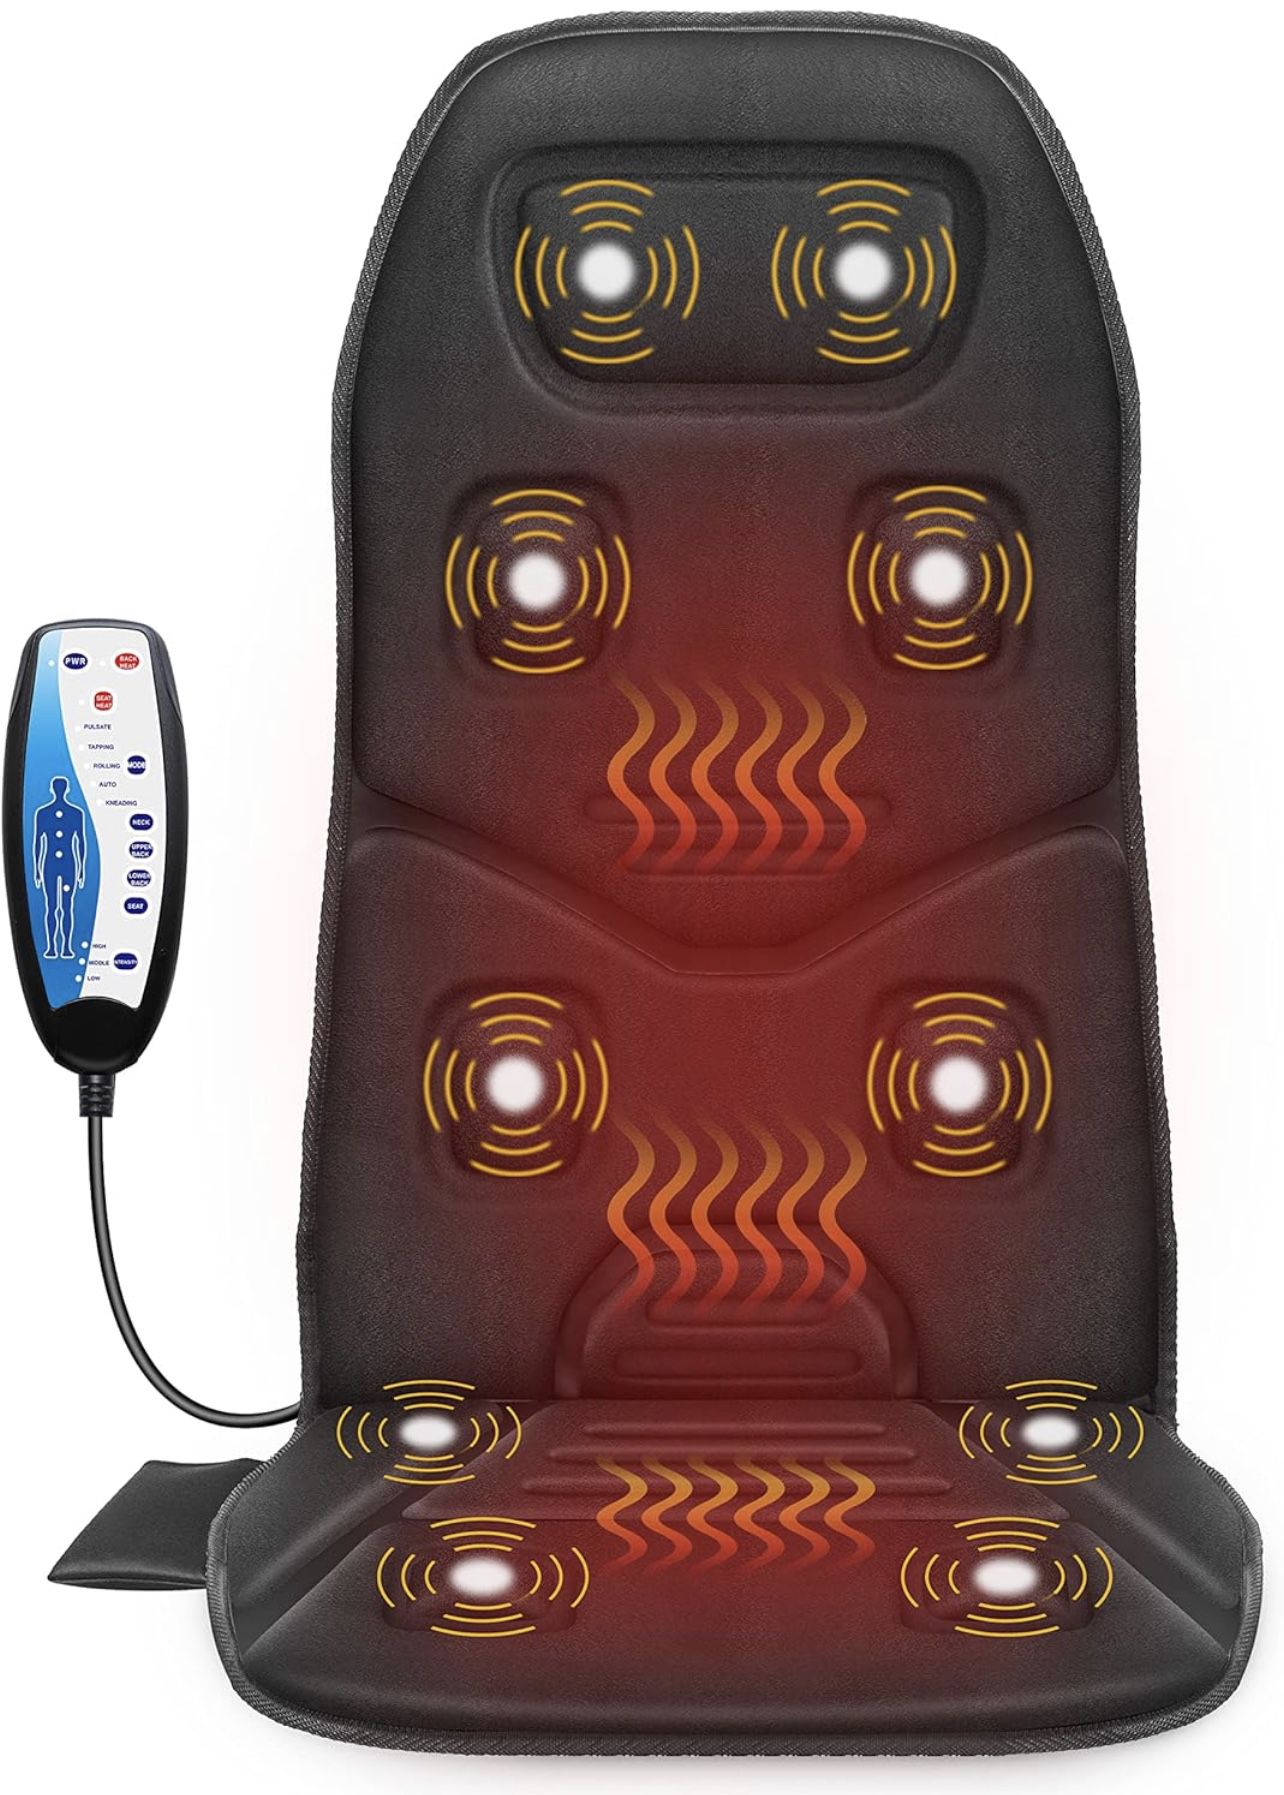 COMFIER Massage Seat Cushion with Heat,10 Vibration Motors Seat Warmer, Back Massager for Chair